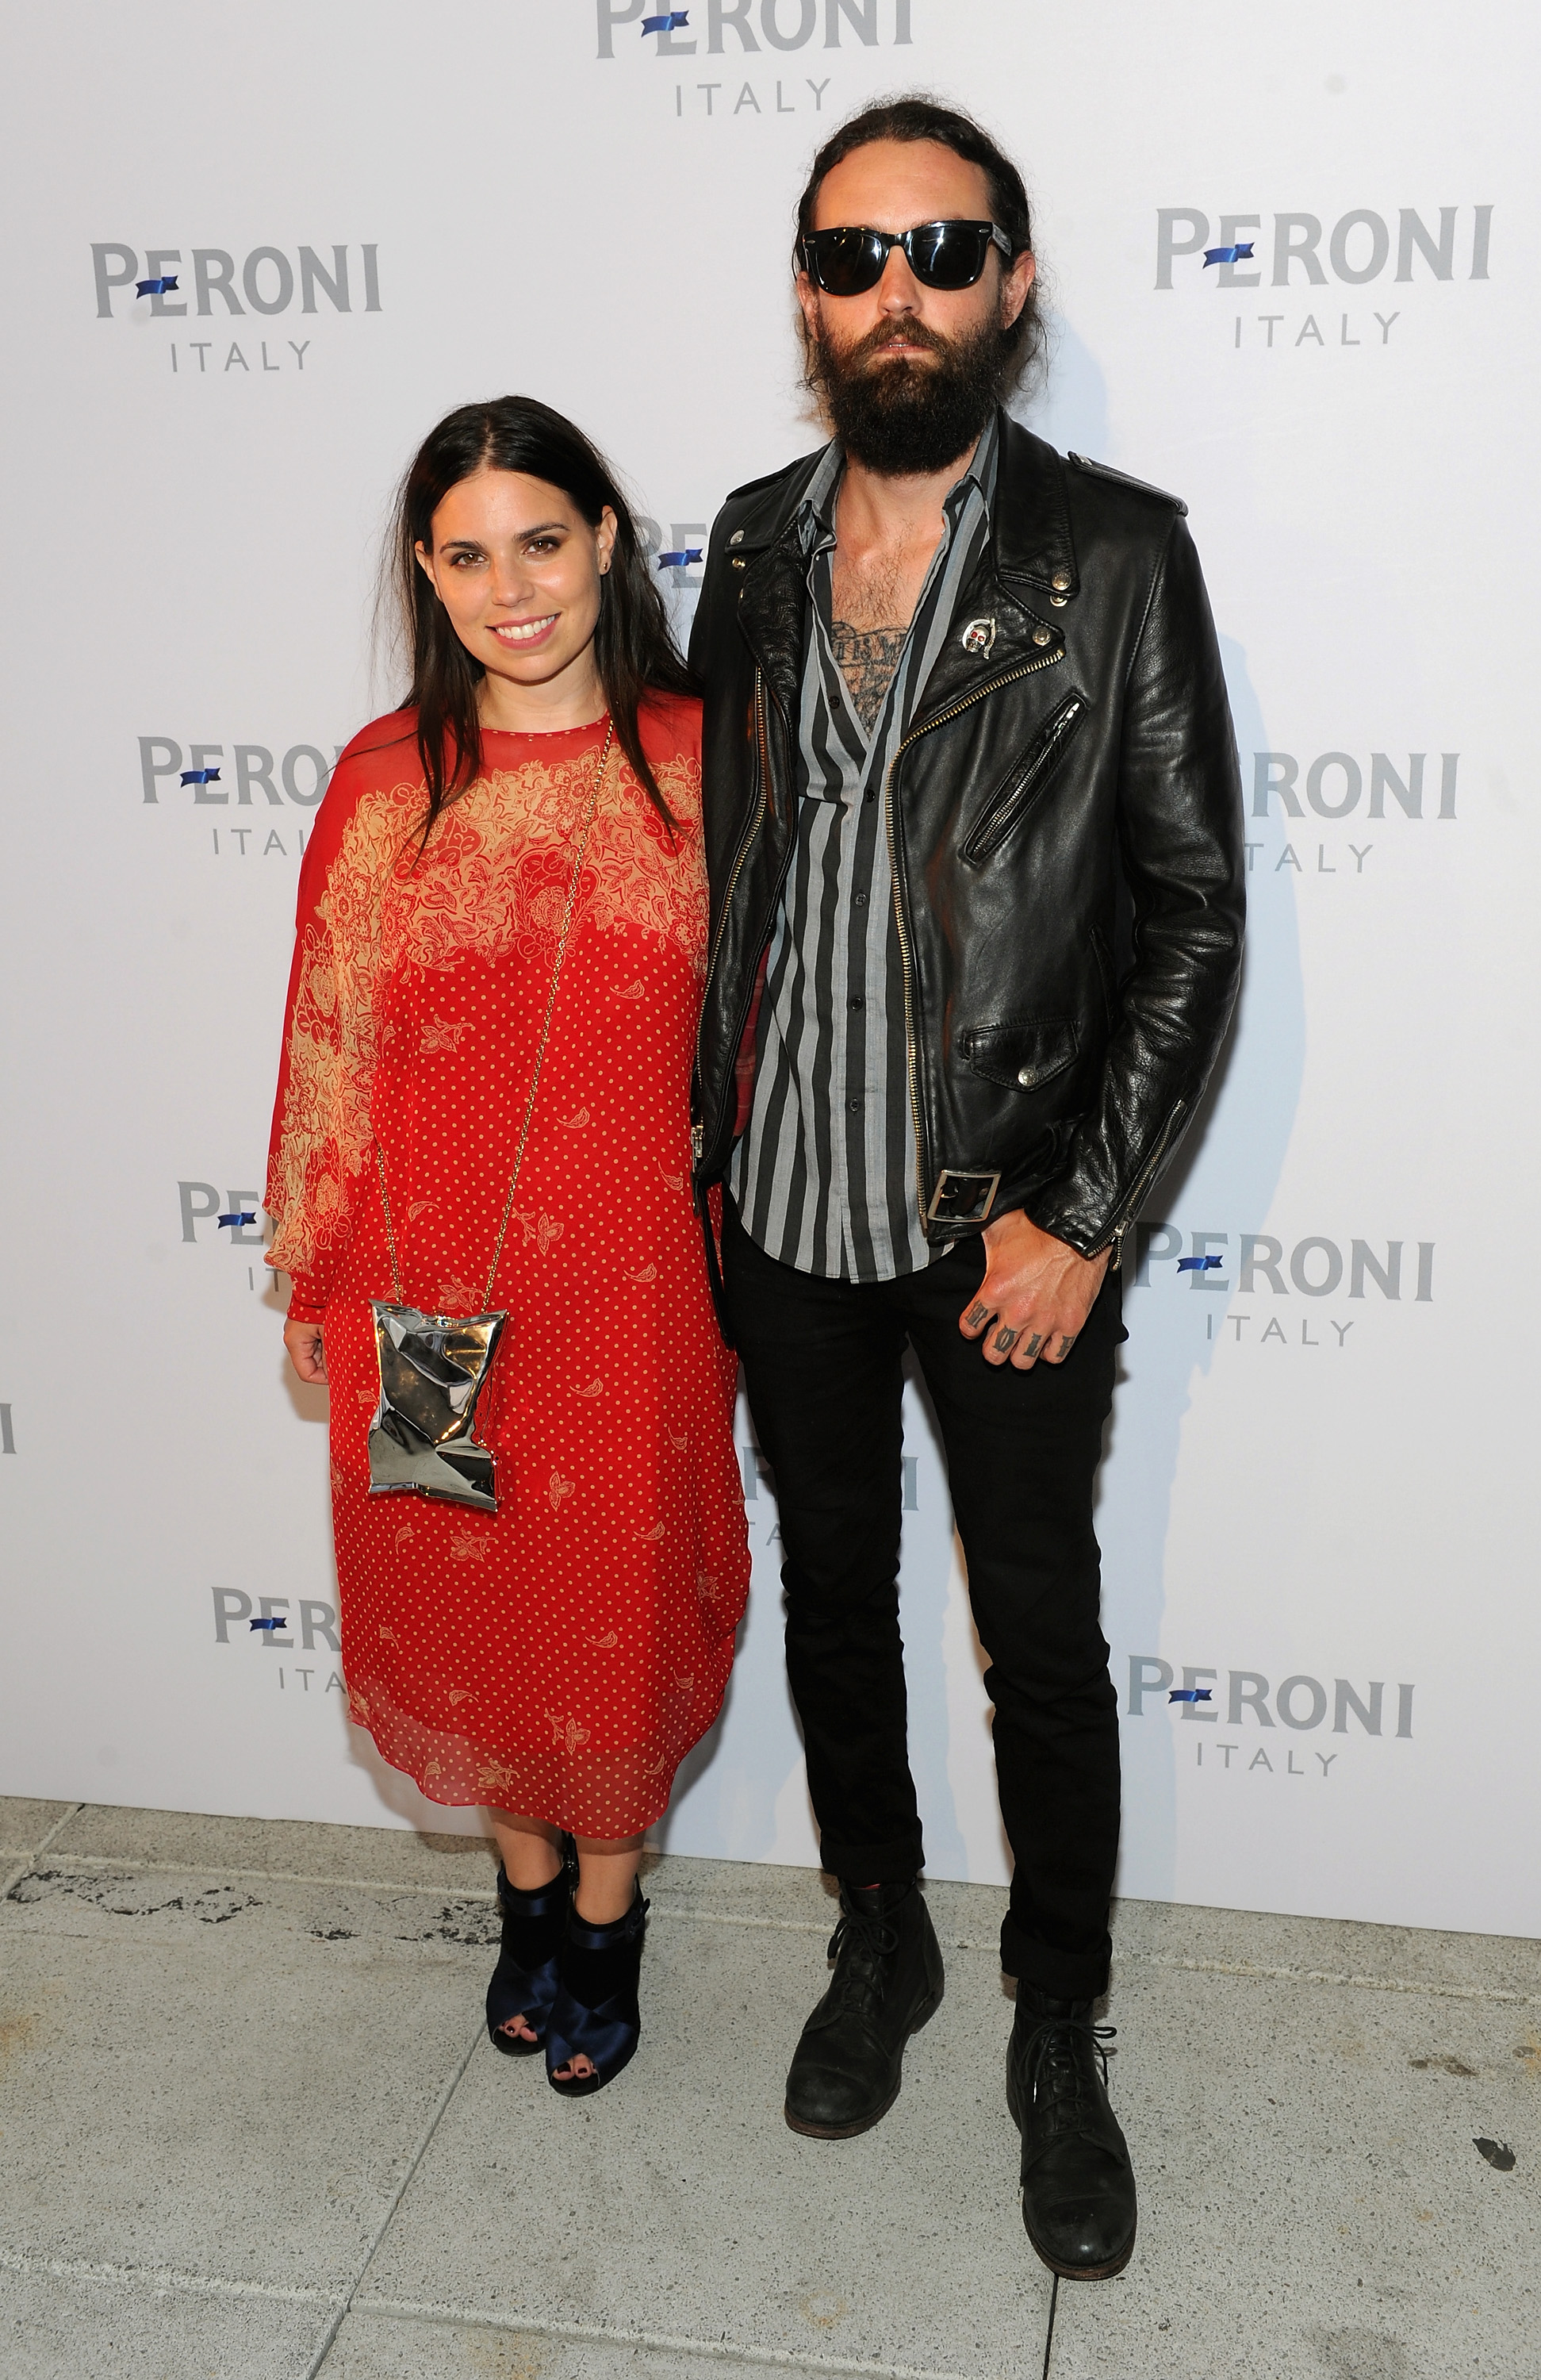 NEW YORK, NY - JUNE 09:  Ally Hilfiger and Steve Hash attend Peroni Nastro Azzurro and Gia Coppola Celebrate Grazie Cinema Series at Hudson Hotel on June 9, 2015 in New York City.  (Photo by Craig Barritt/Getty Images for Peroni Nastro Azzurro)